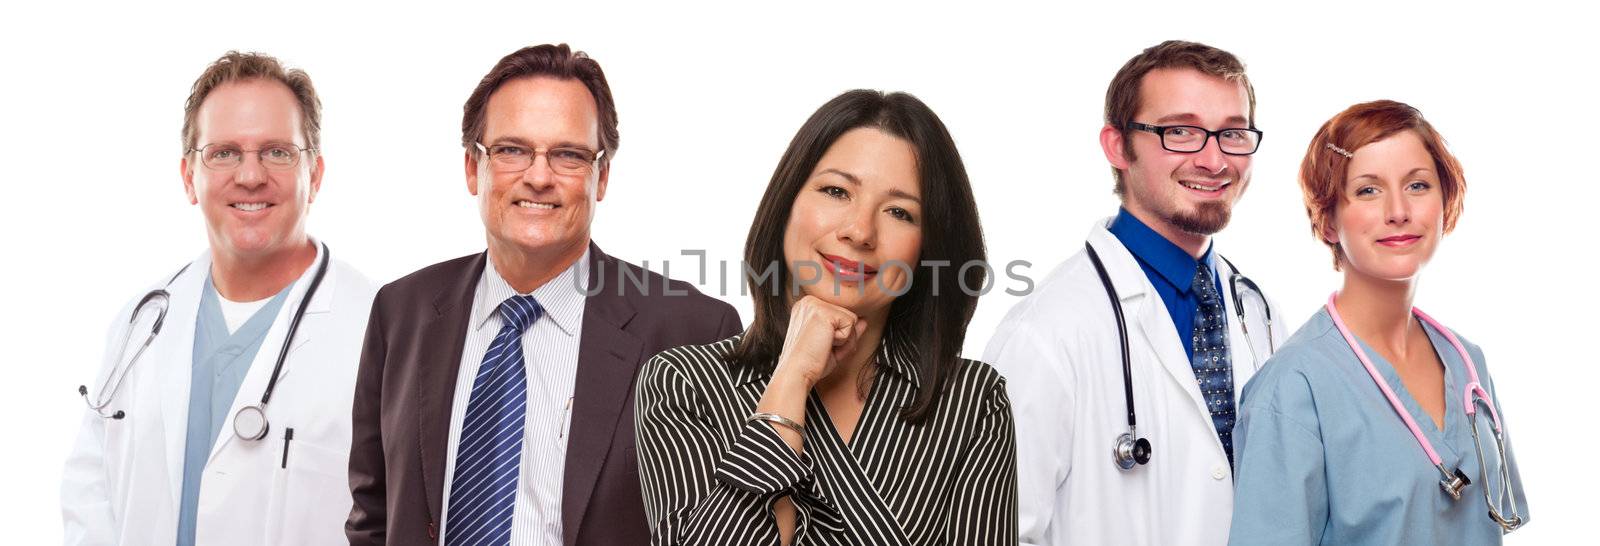 Attractive Hispanic Woman with Businessman and Male Doctors or Nurses Isolated on a White Background.